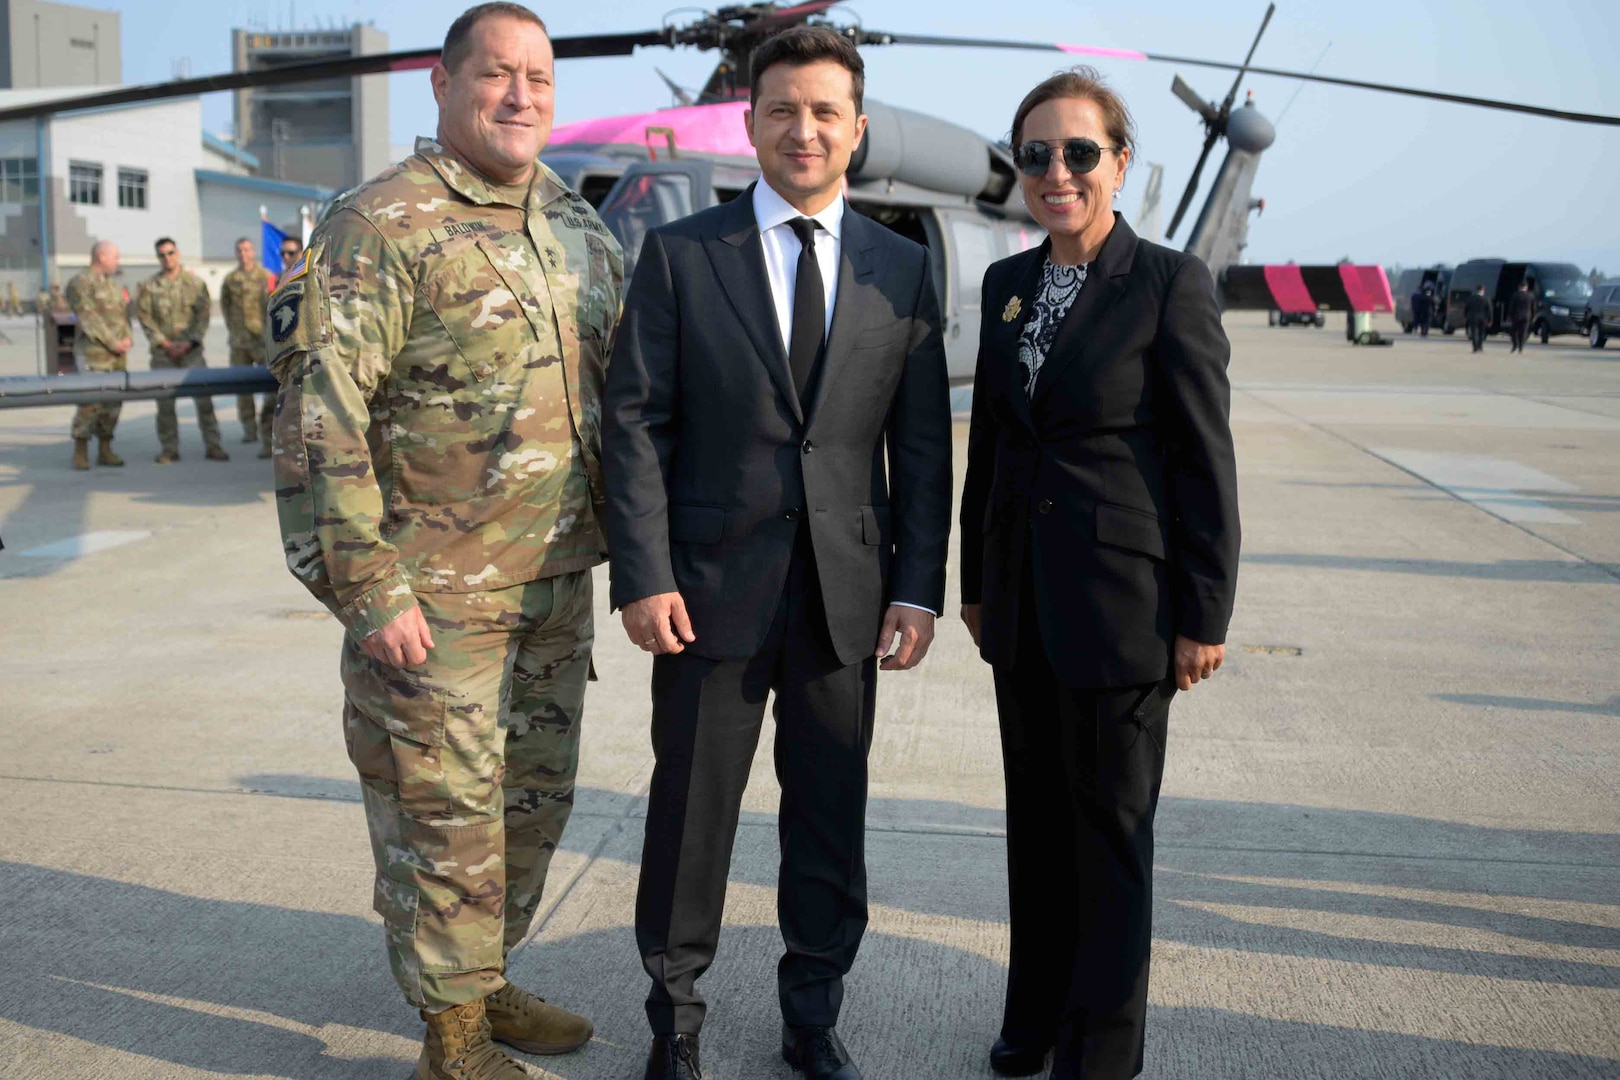 U.S. Army Maj. Gen. David Baldwin, adjutant general of the California National Guard, left, Volodymyr Zelenskyy, president of Ukraine, and California Lt. Gov. Eleni Kounalakis visit the California Air National Guard’s 129th Rescue Wing at Moffett Air National Guard Base, California, Sept. 2, 2021. The California National Guard and Ukraine State Partnership Program was established in 1993 through the Department of Defense to develop and strengthen the strategic partnership between the United States and Ukraine.